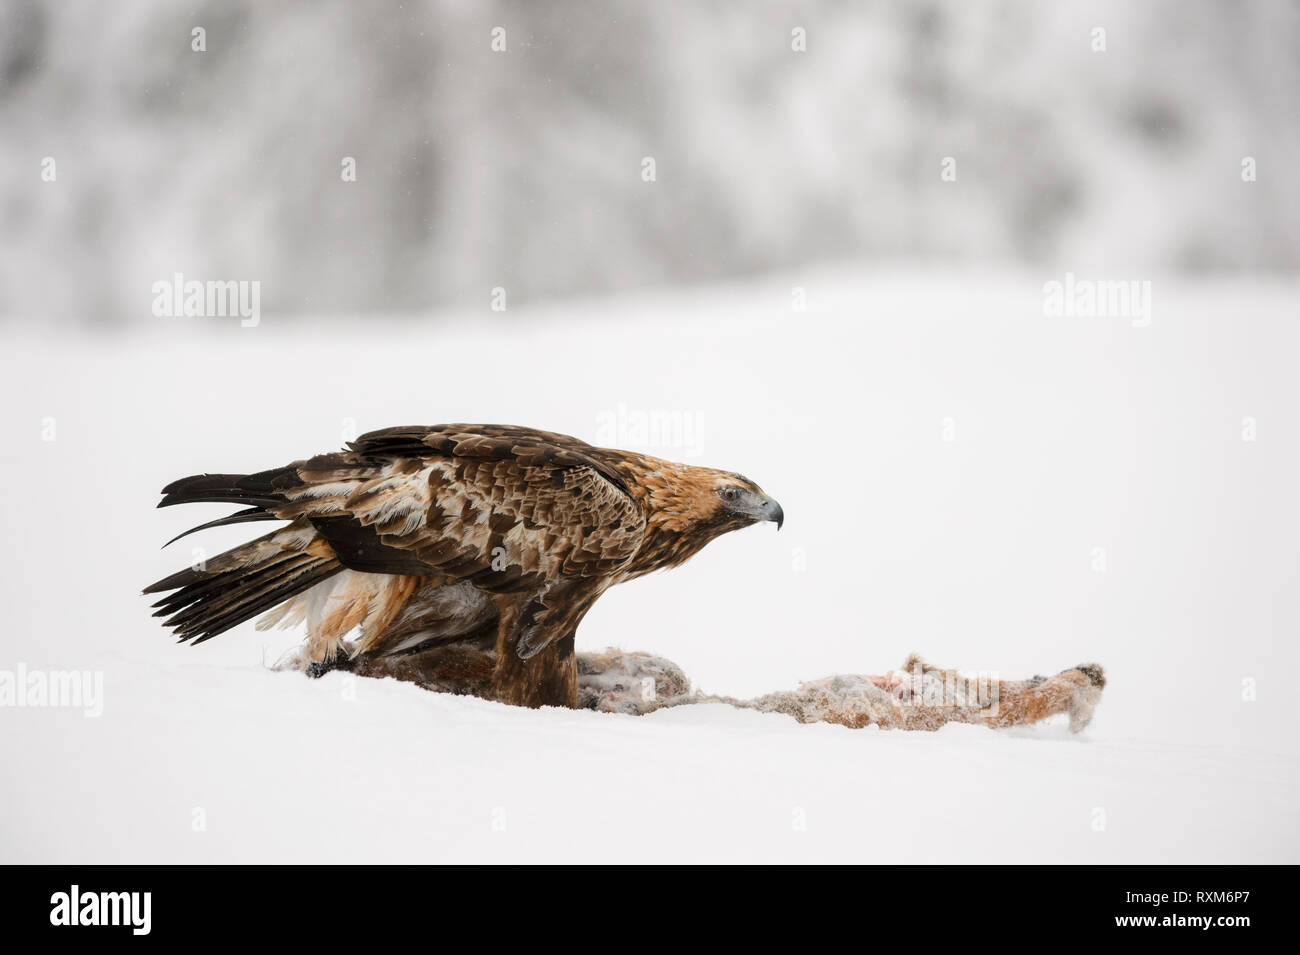 Golden eagle on a prey in snow during winter, Oulanka national Park, Finland Stock Photo